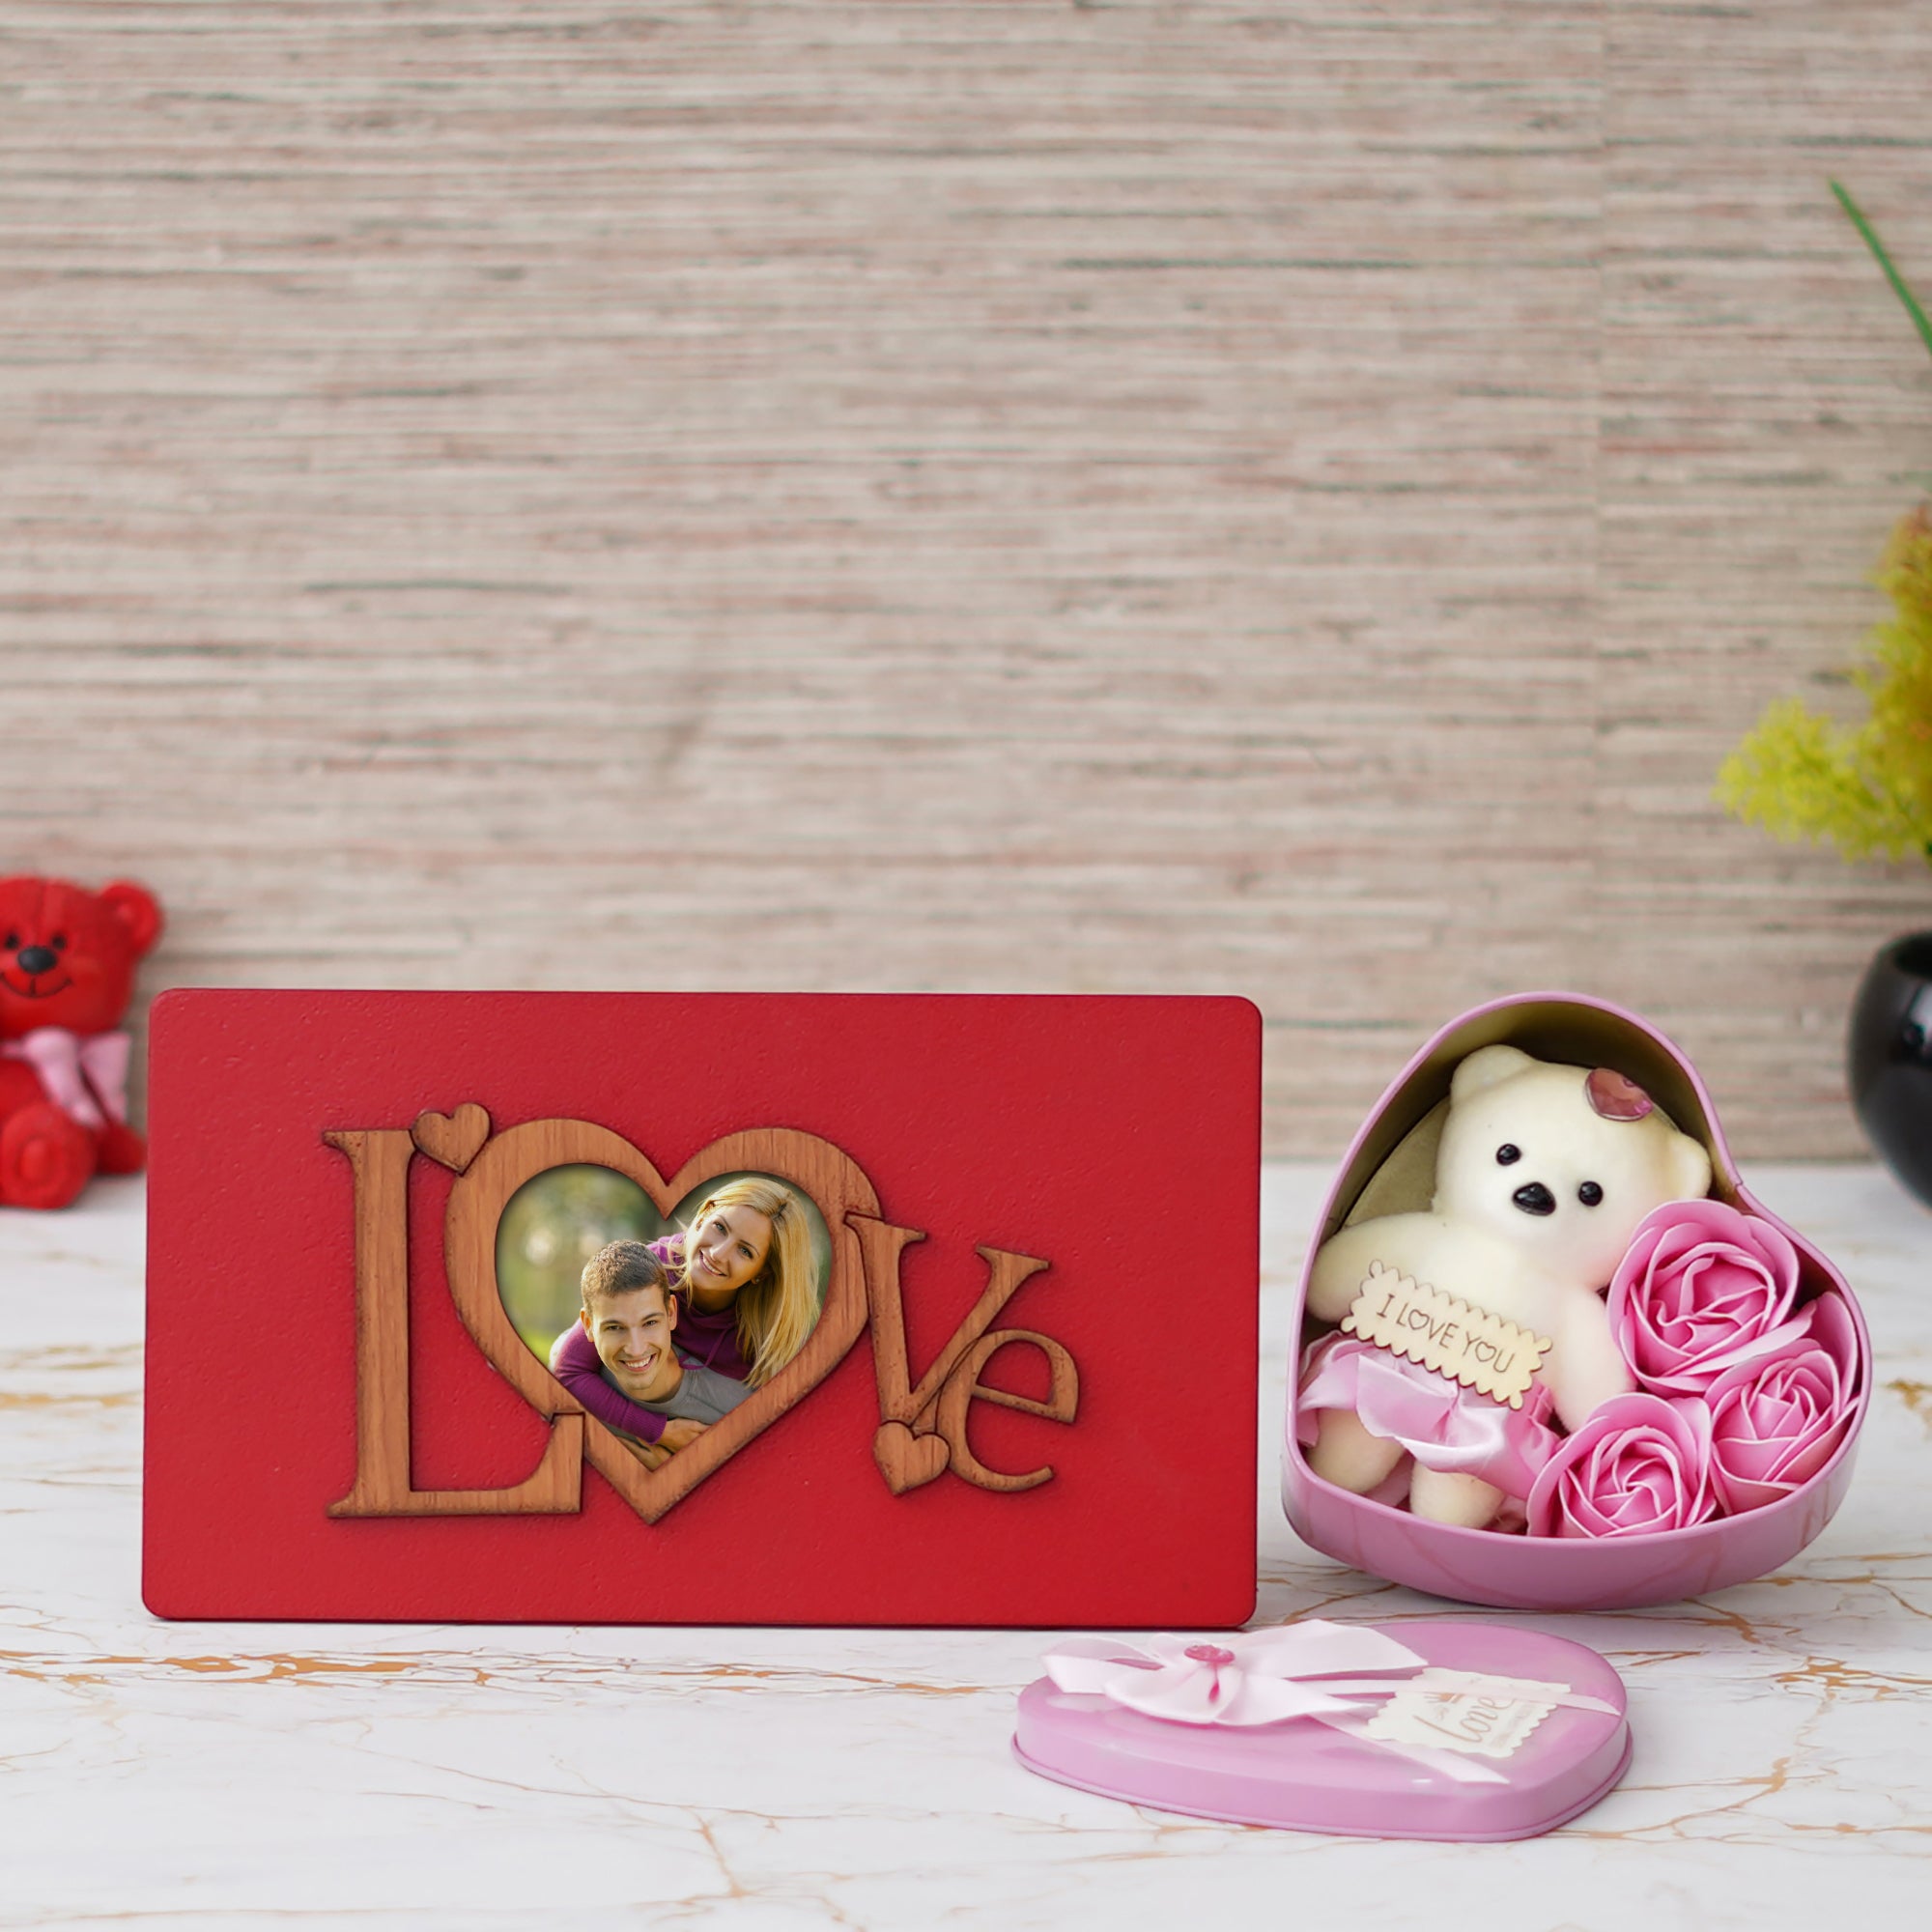 Valentine Combo of "Love" Wooden Photo Frame With Red Stand, Pink Heart Shaped Gift Box with Teddy and Roses